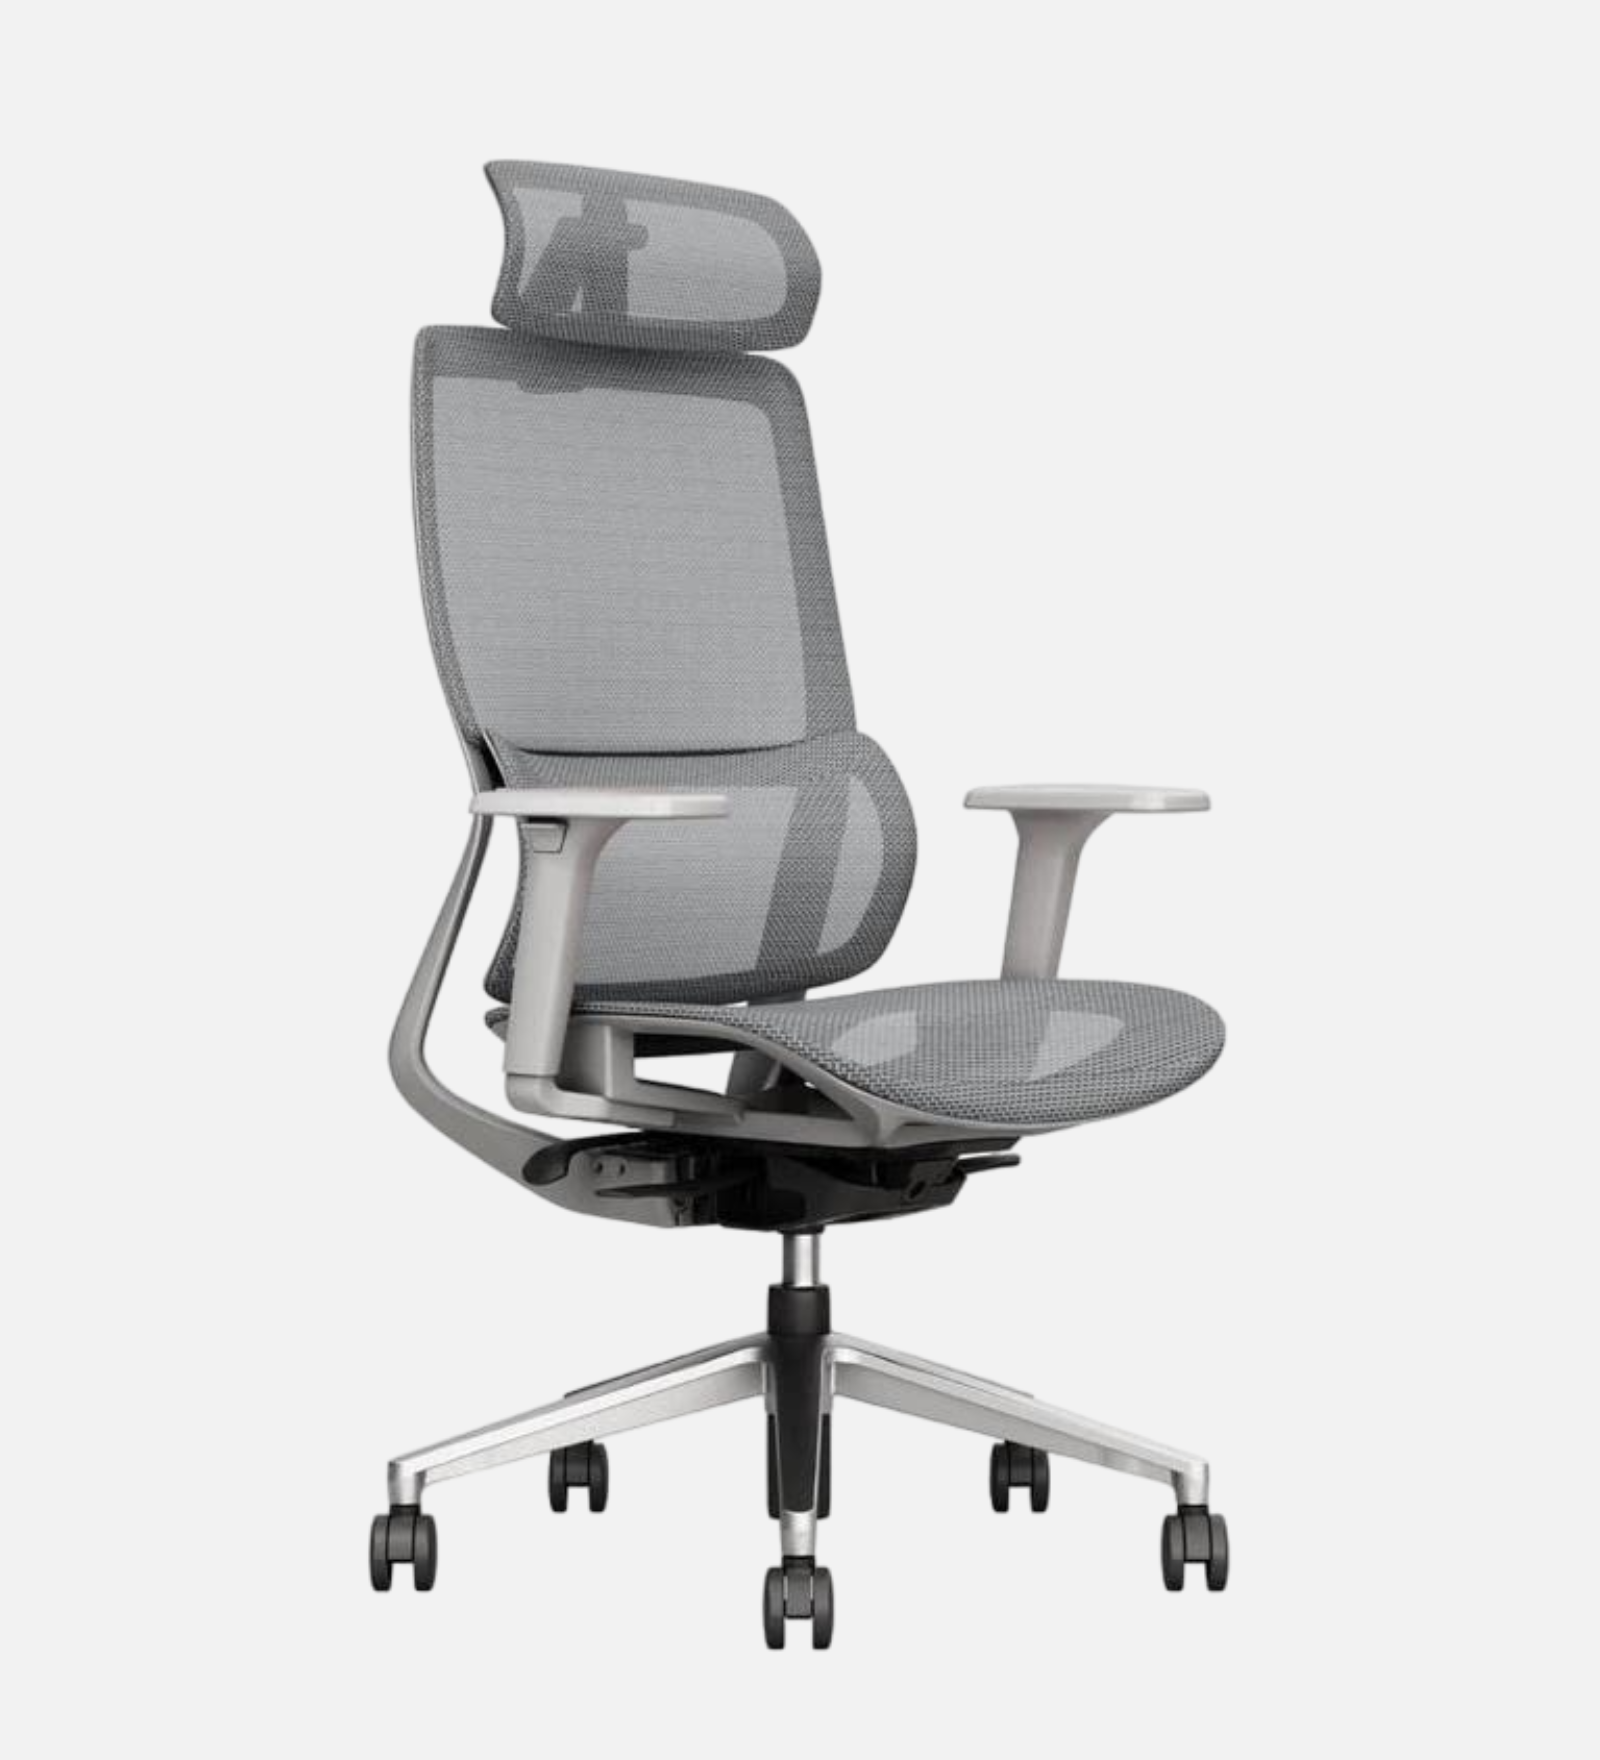 Wave 135° Tilt angle High Back Ergonomic Office Chair With Mesh Seat, 3D Armrest And Aluminum Base with Nylon Castors- Grey